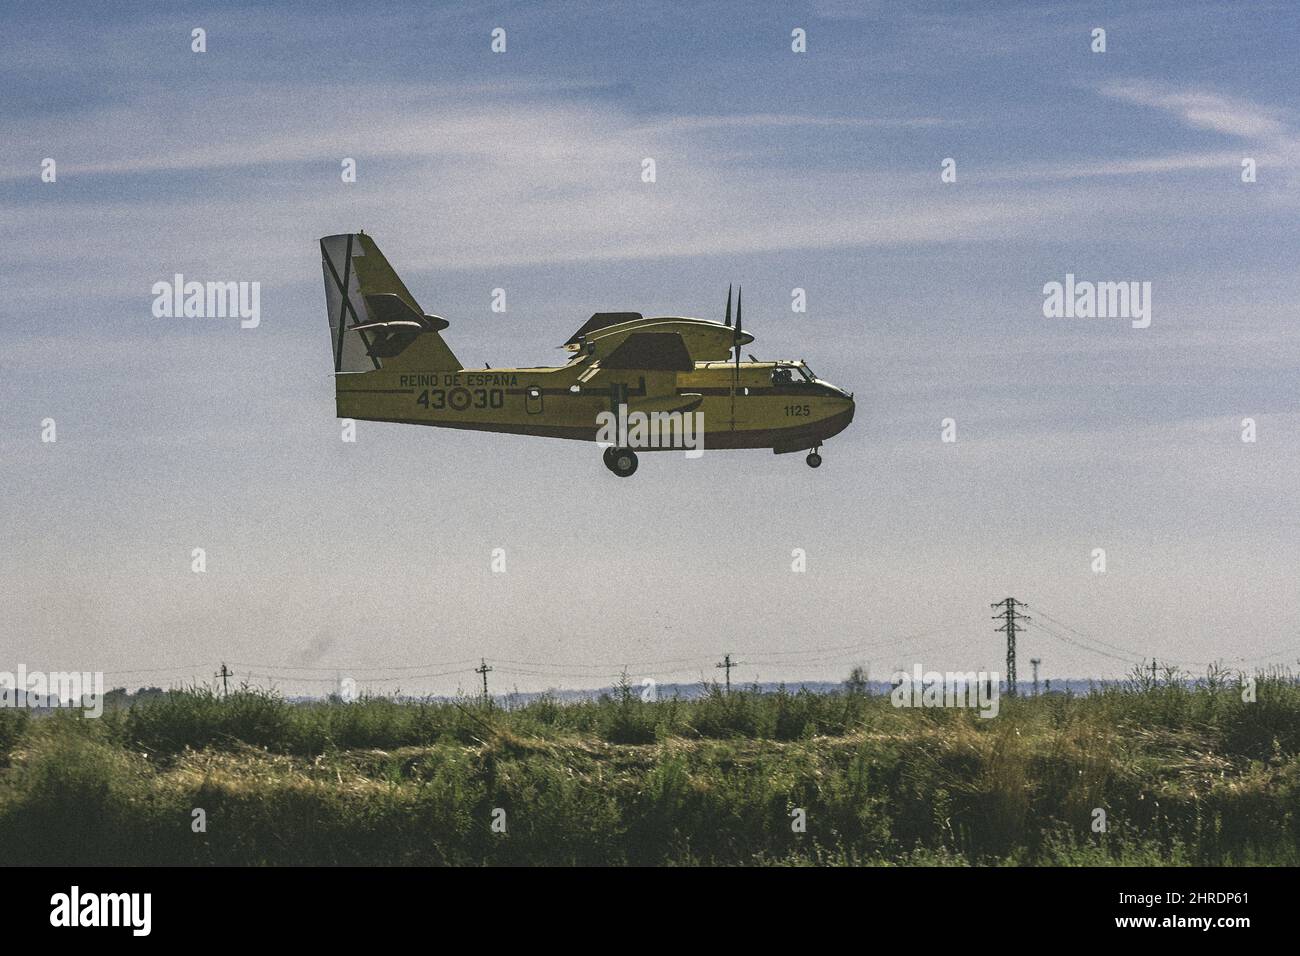 Old yellow amphibian air plane - Canadair CL-215T Stock Photo